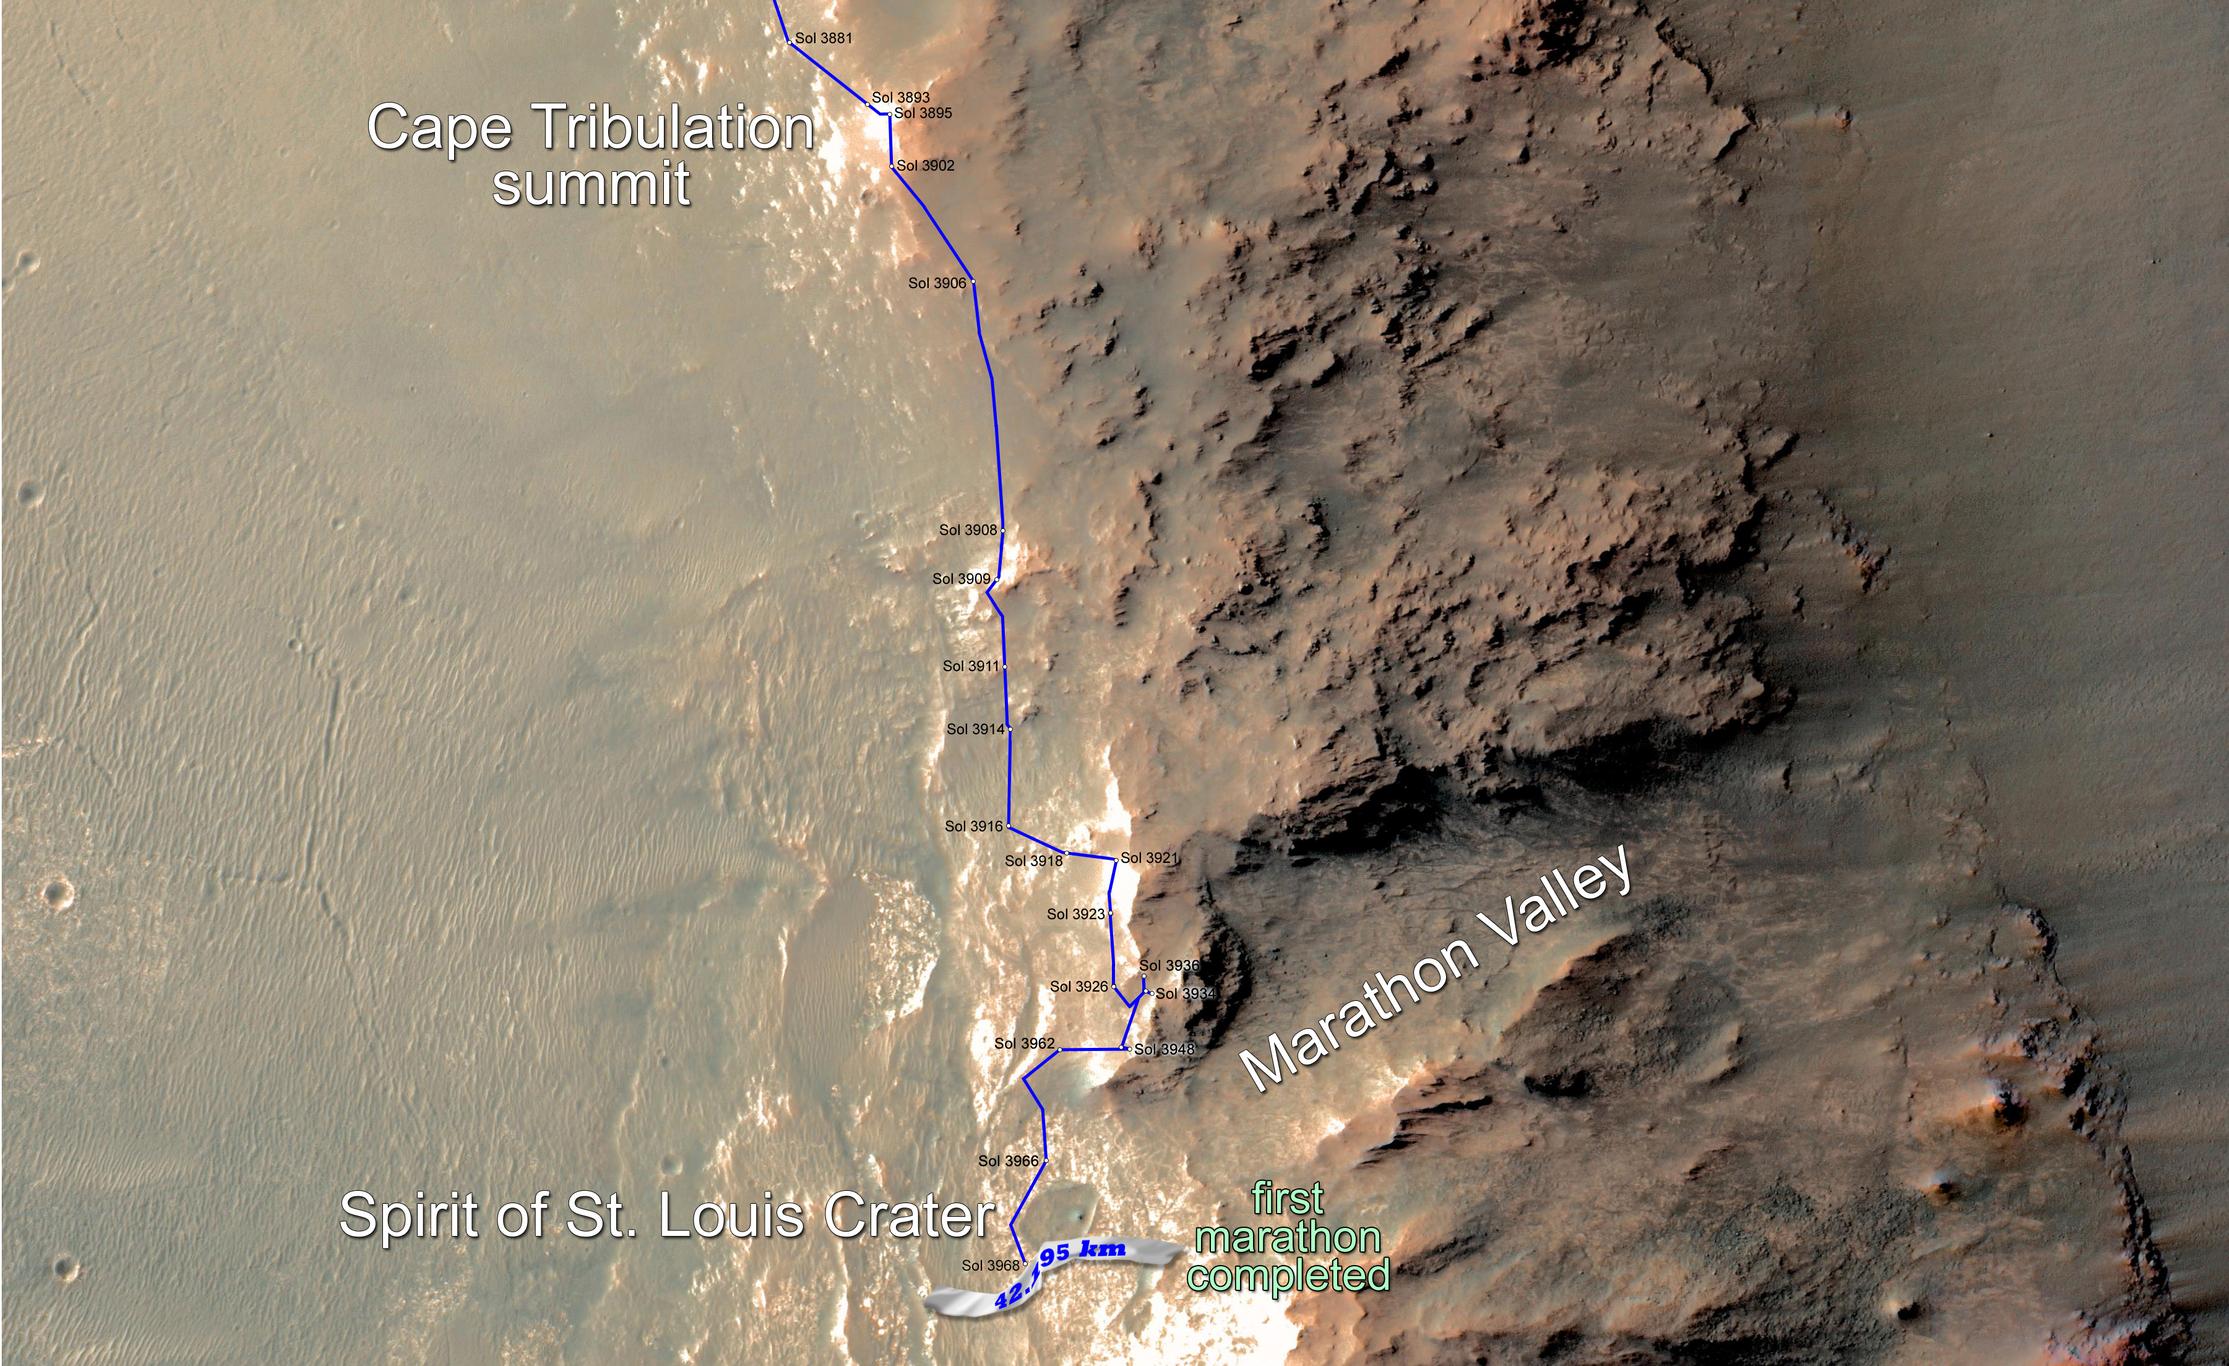 Eleven years and two months after its landing on Mars, the total driving distance of NASA's Opportunity Mars rover surpassed the length of a marathon race: 26.219 miles (42.195 kilometers). This map shows the rover's path from late December 2014 until it passed marathon distance on March 24, 2015.